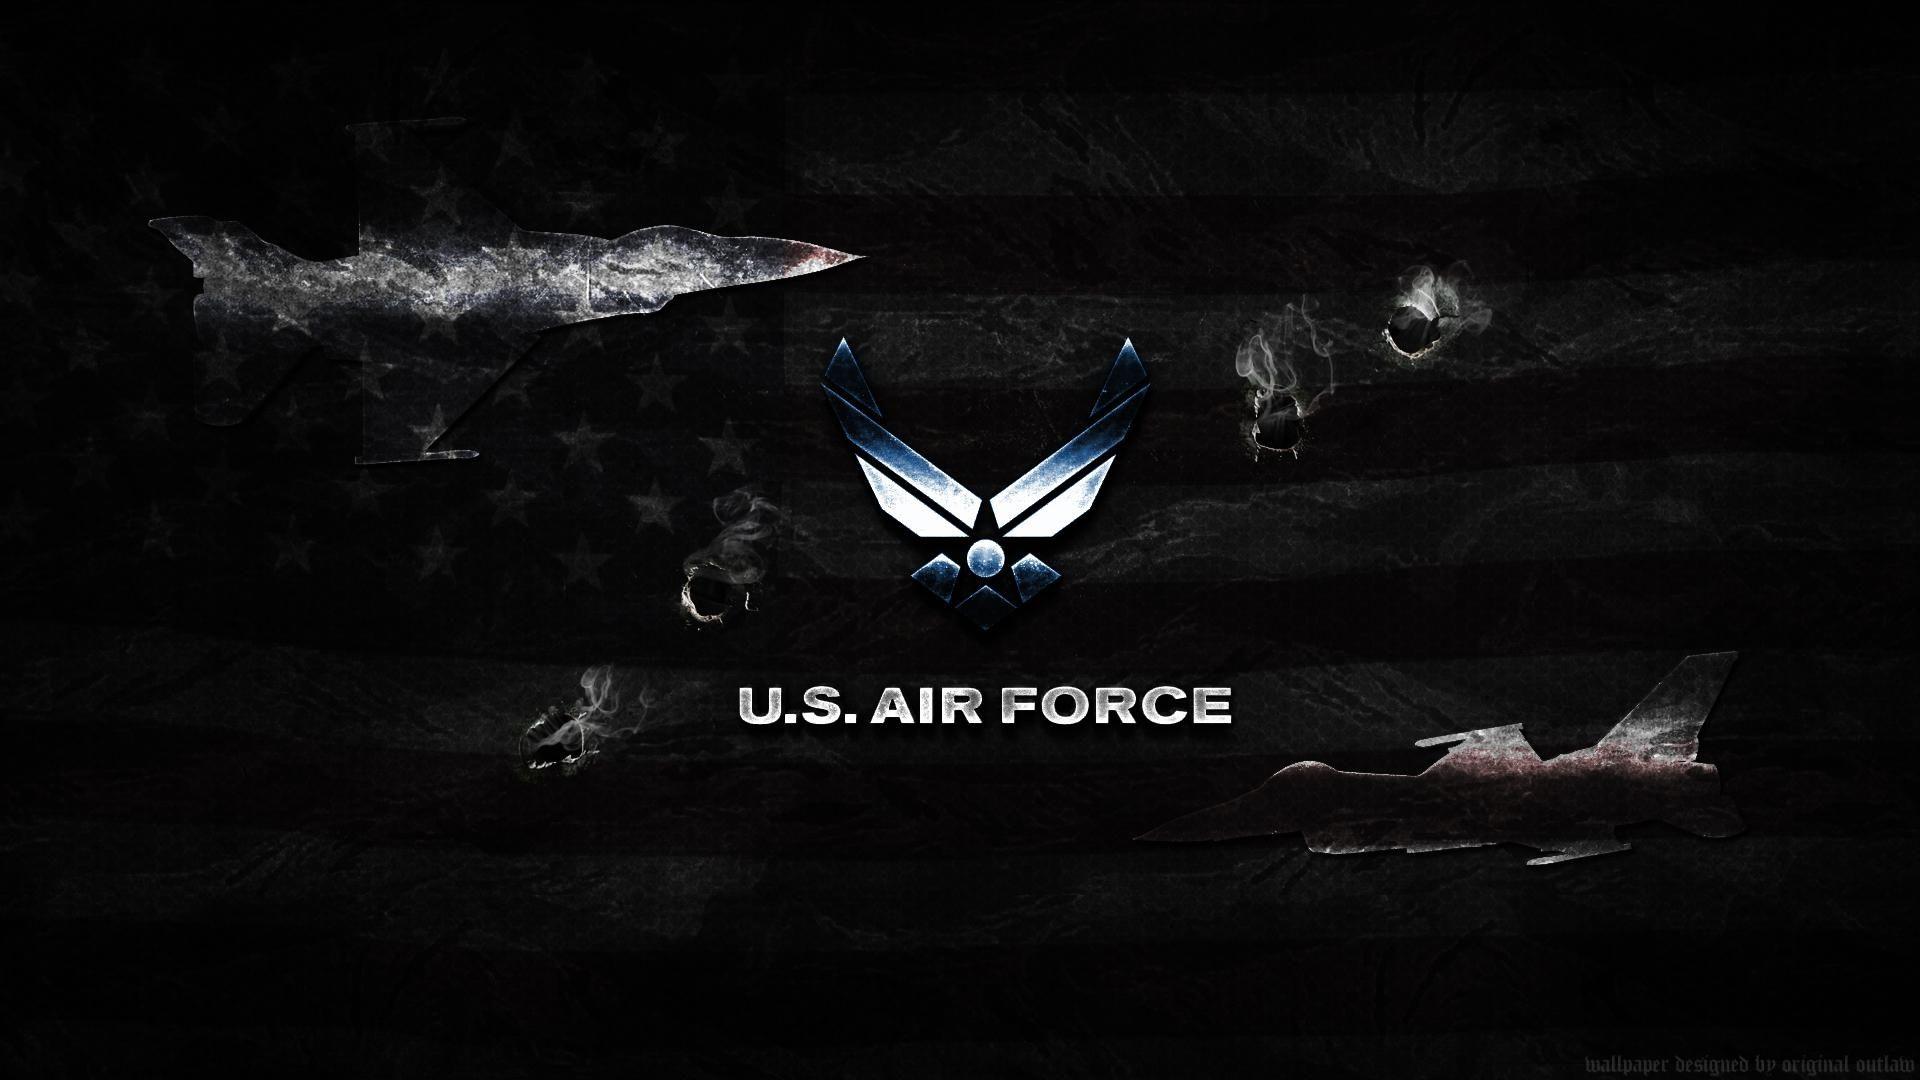 Best Air Force Desktop Background FULL HD 1920×1080 For PC Desktop. Air force wallpaper, Air force, Air force families